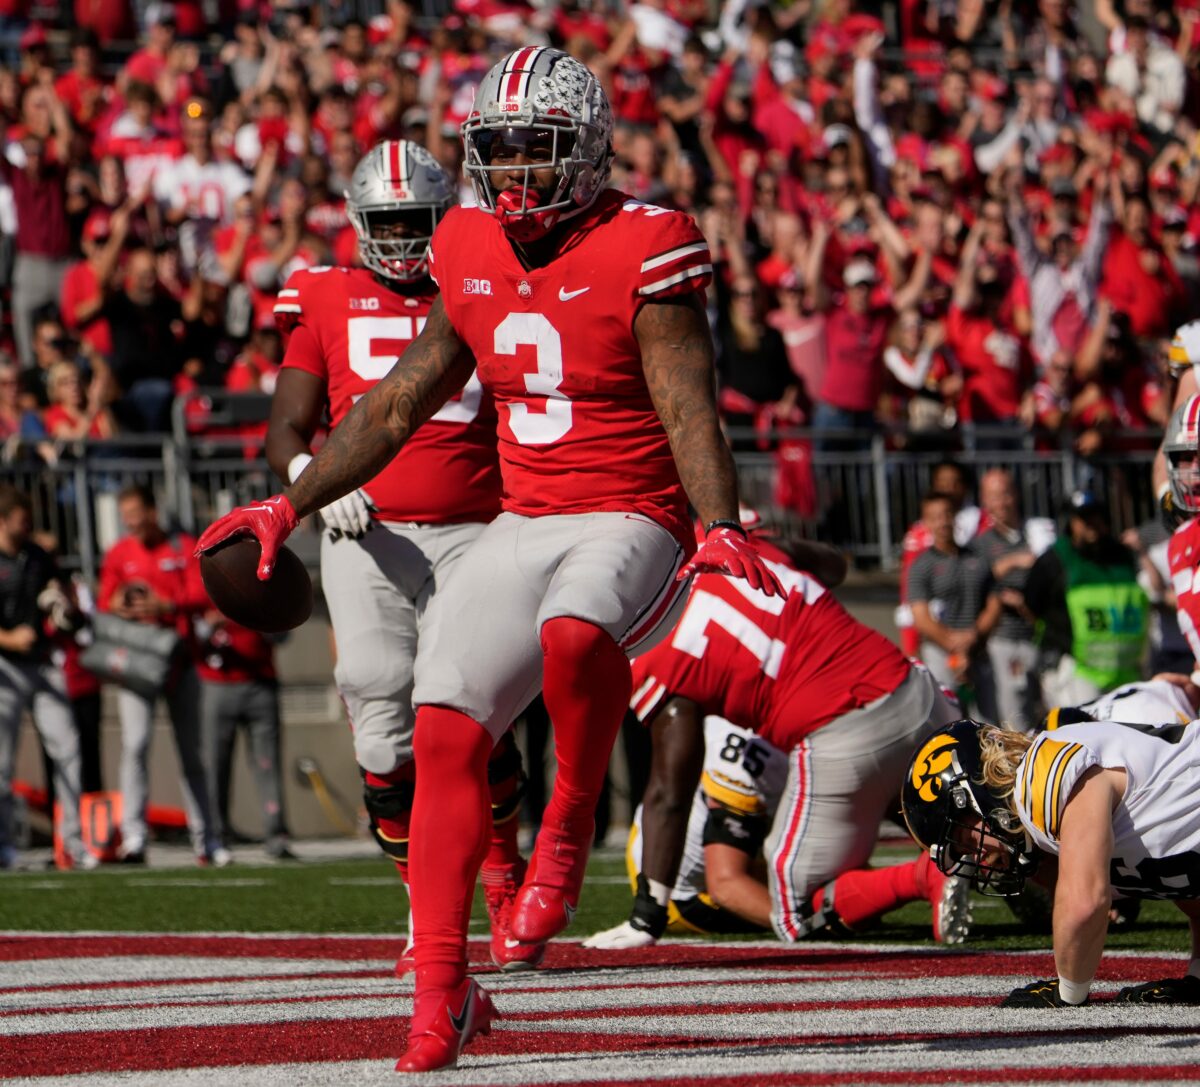 ESPN updates its college football power rankings after Week 8. Where is Ohio State?